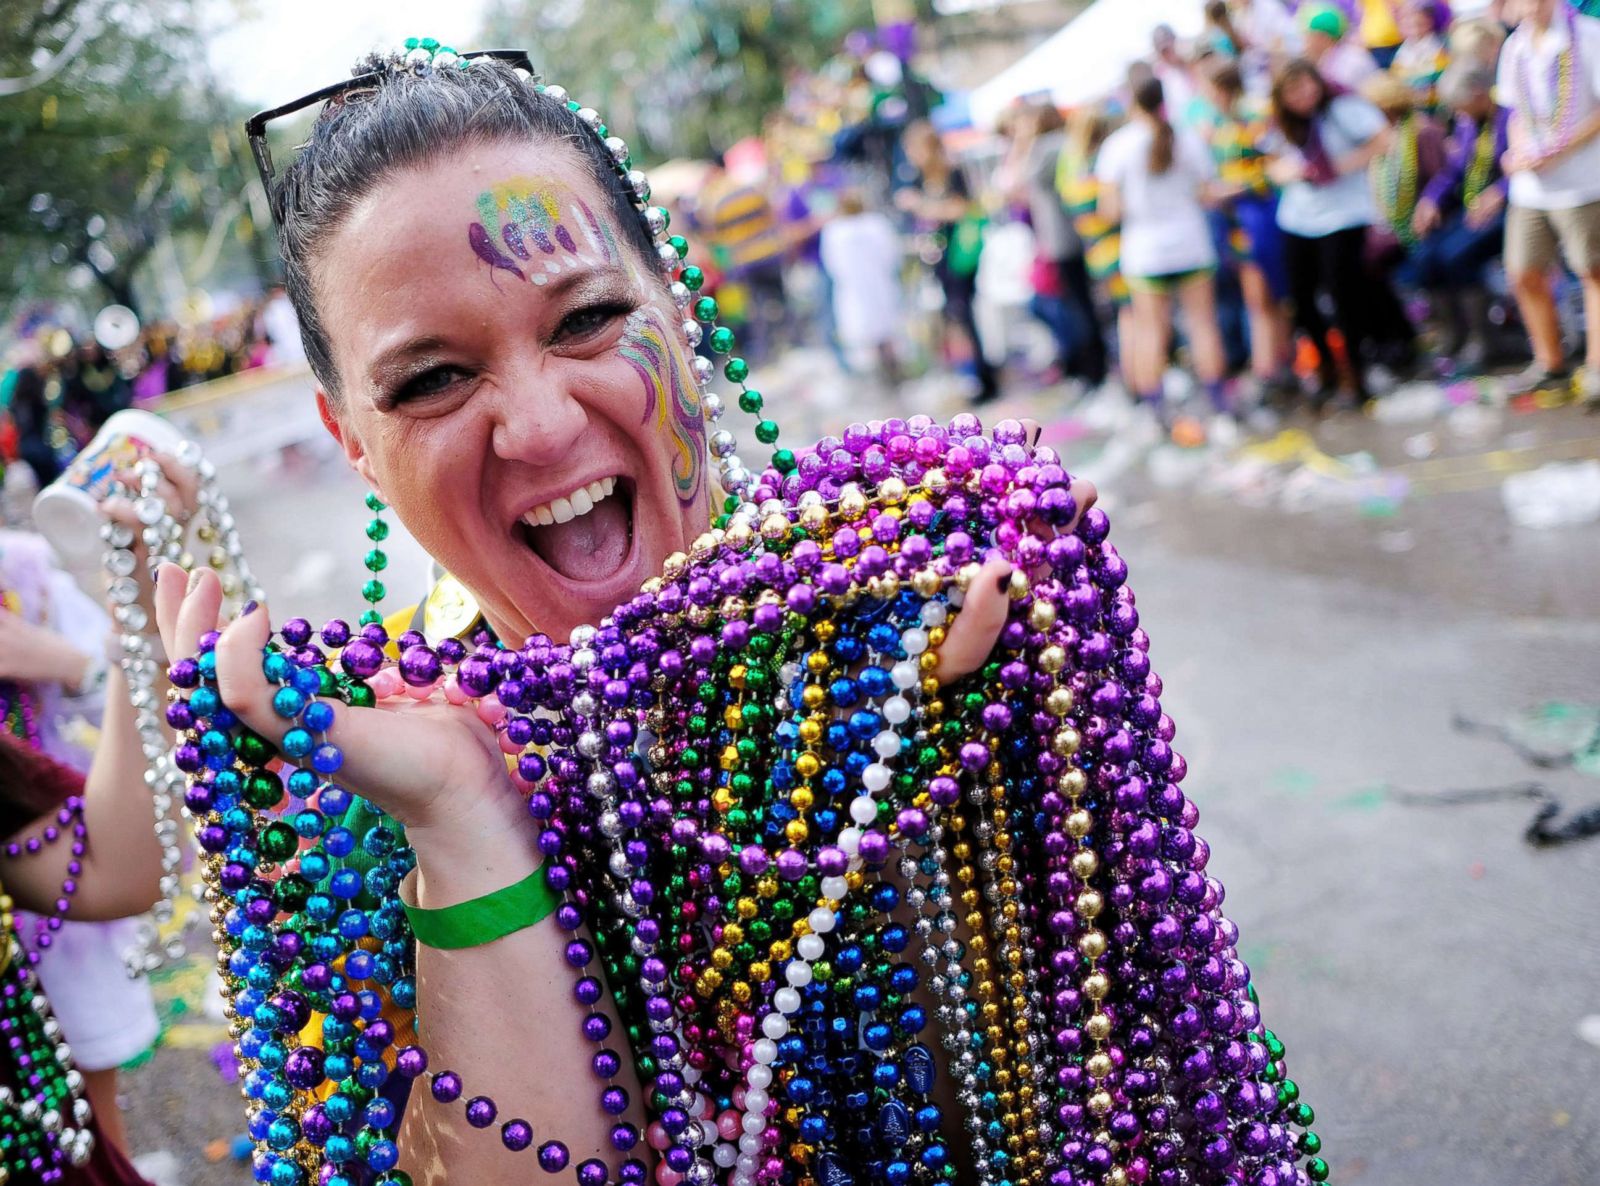 shows off her catch of beads from the Krewe of Thoth parade during Mardi Gr...